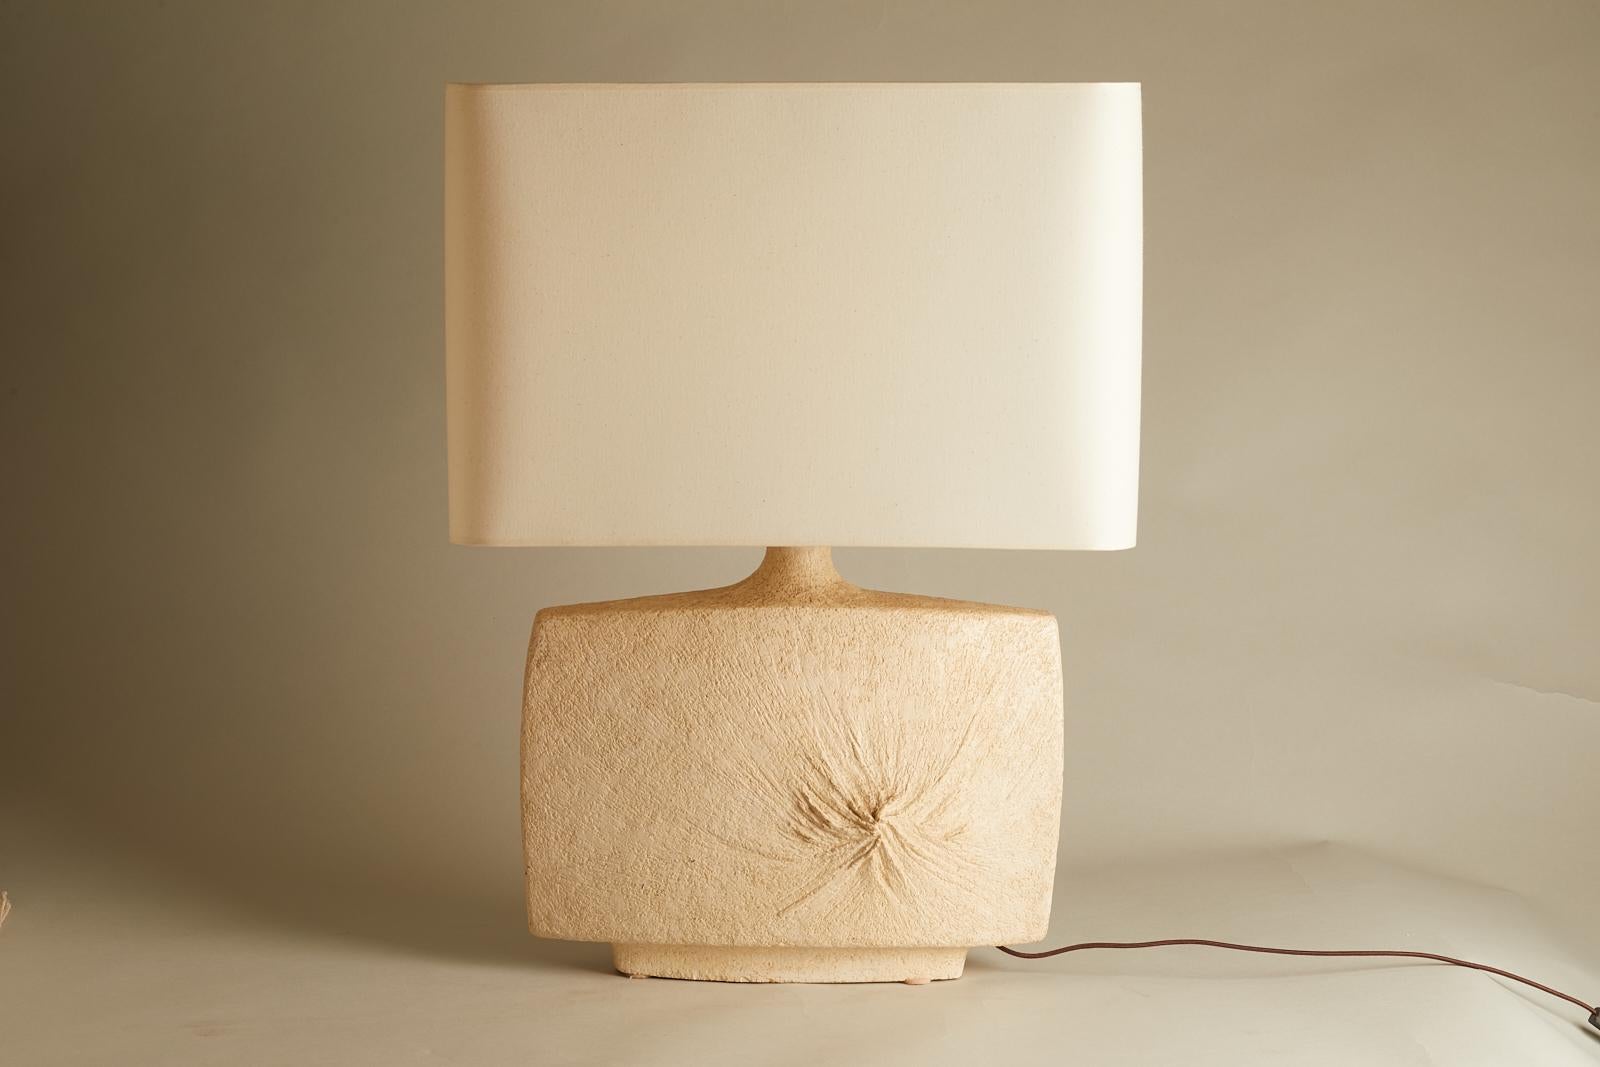 1970s French ceramic table lamp from Vallauris with swirl detail.